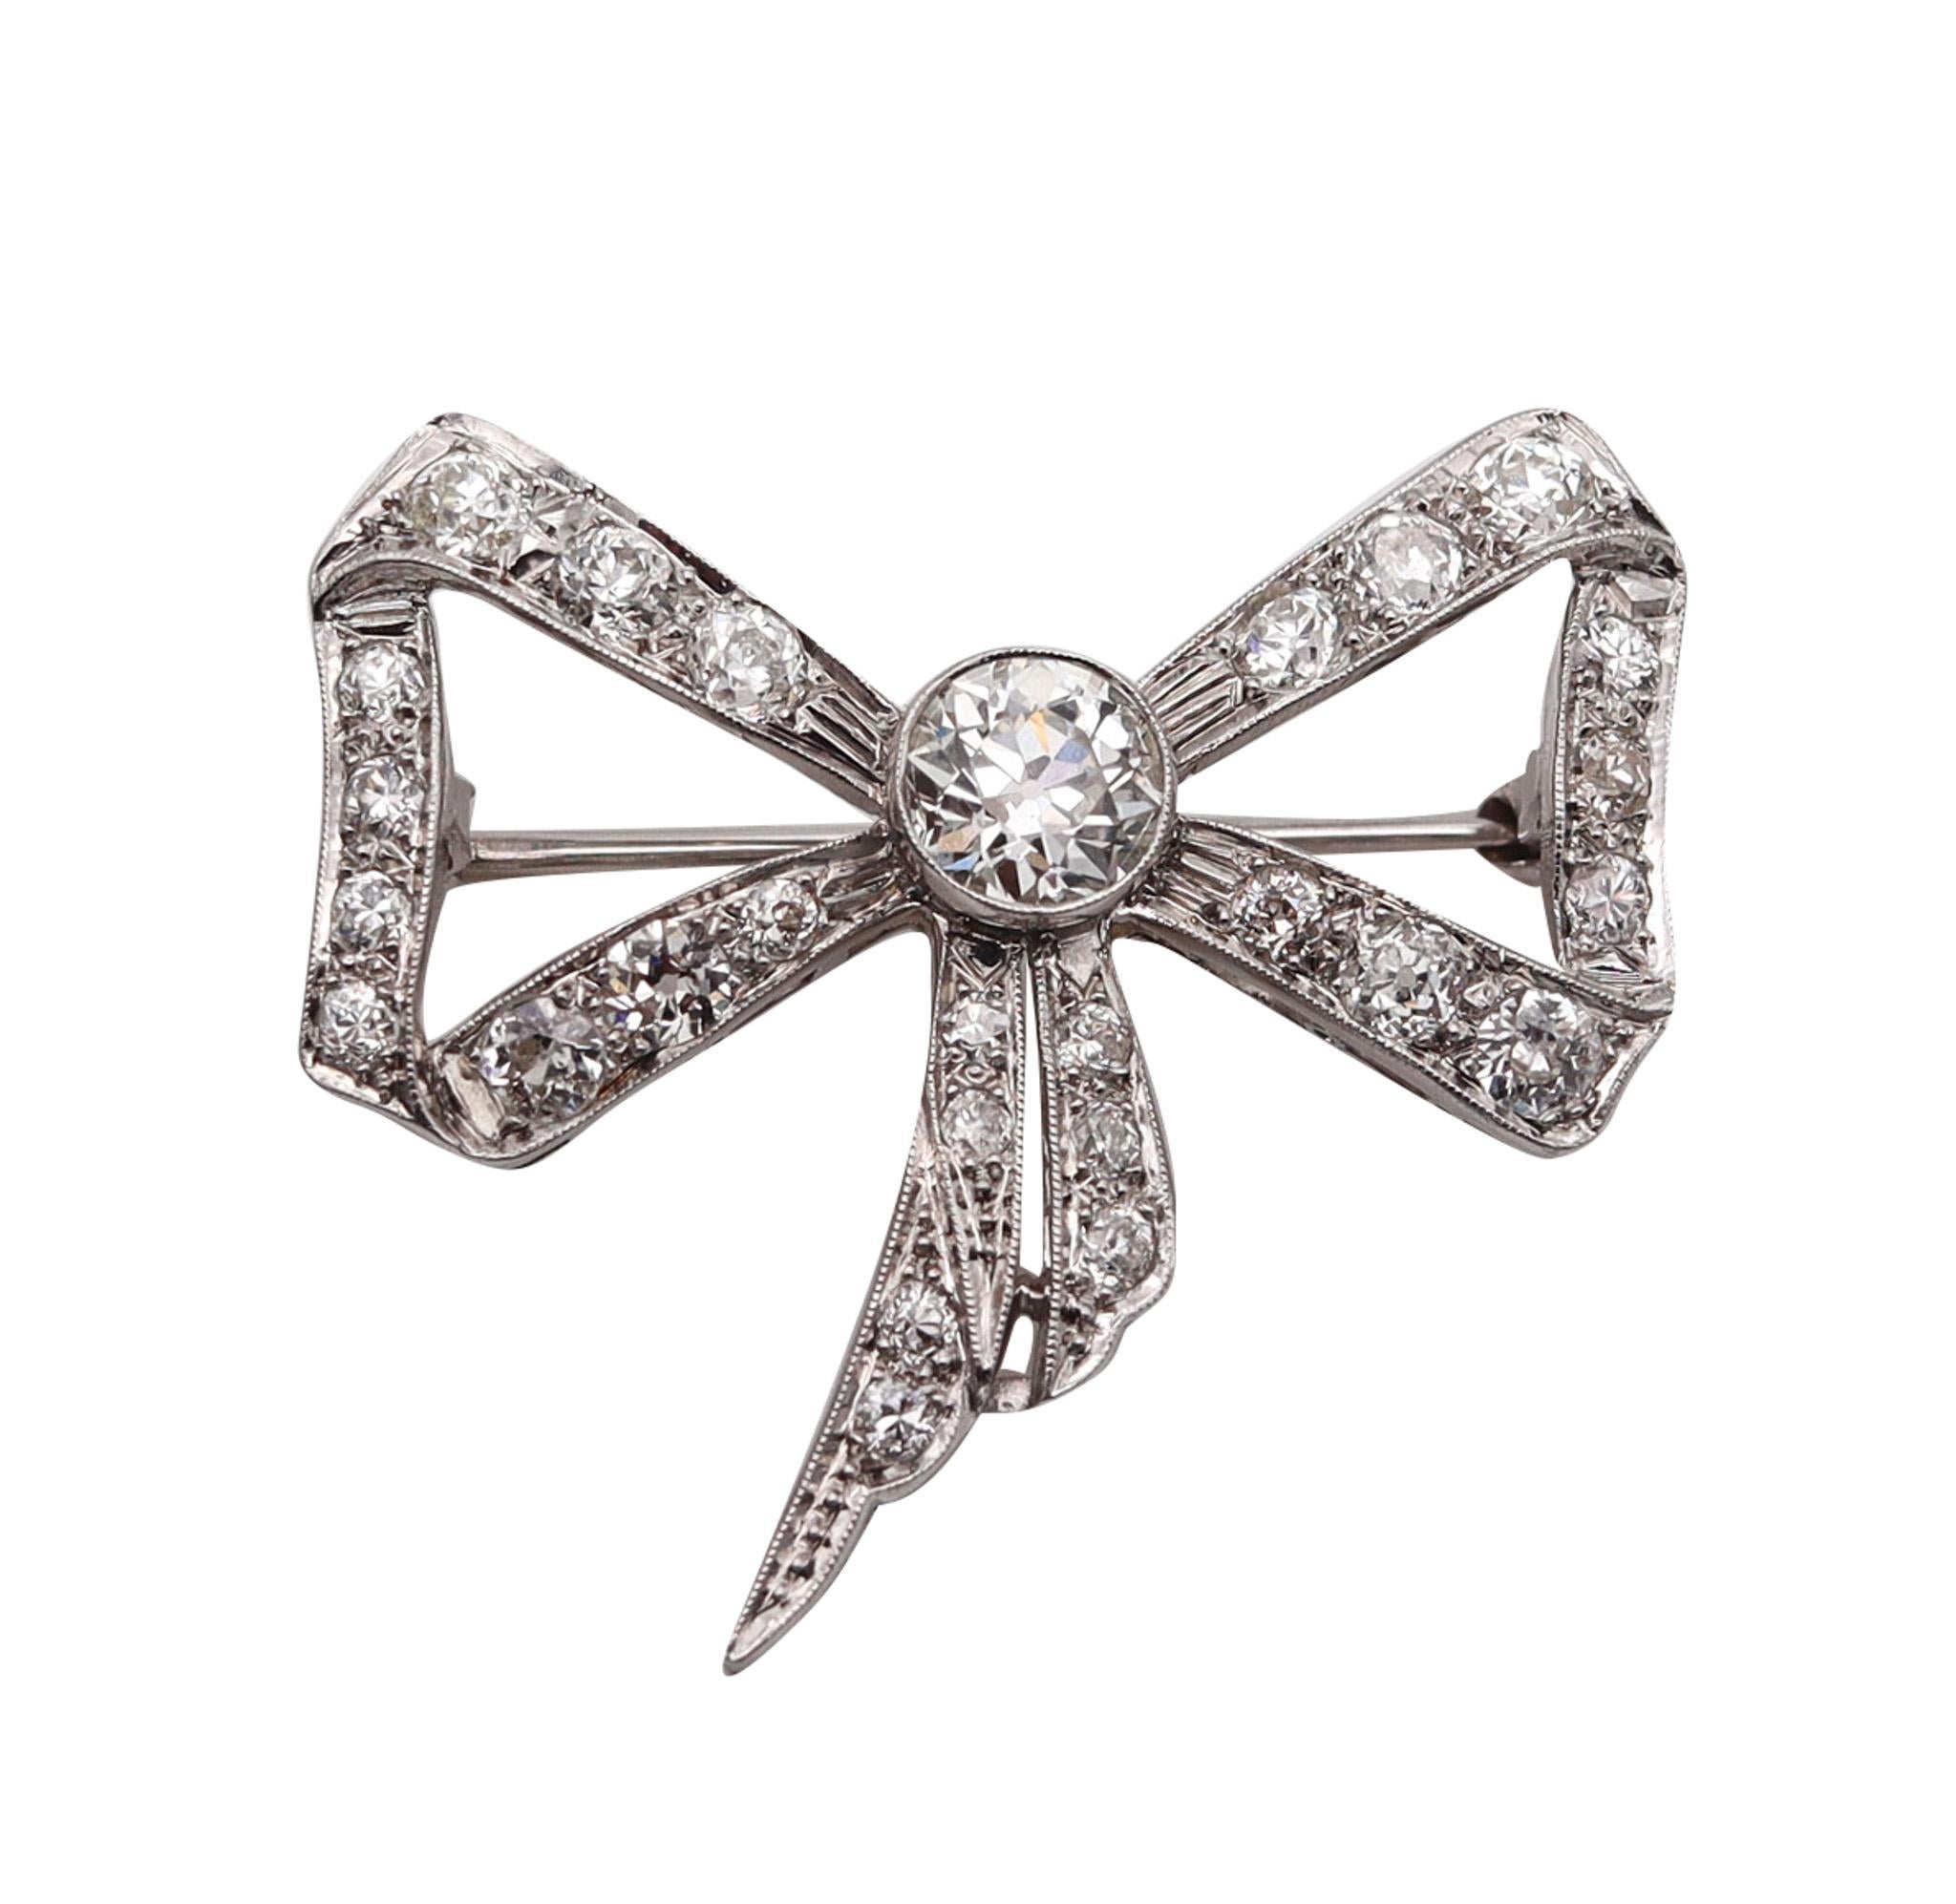 Edwardian 1905 Belle Epoque Bow Brooch in Platinum with 3.35 Ctw in Diamonds For Sale